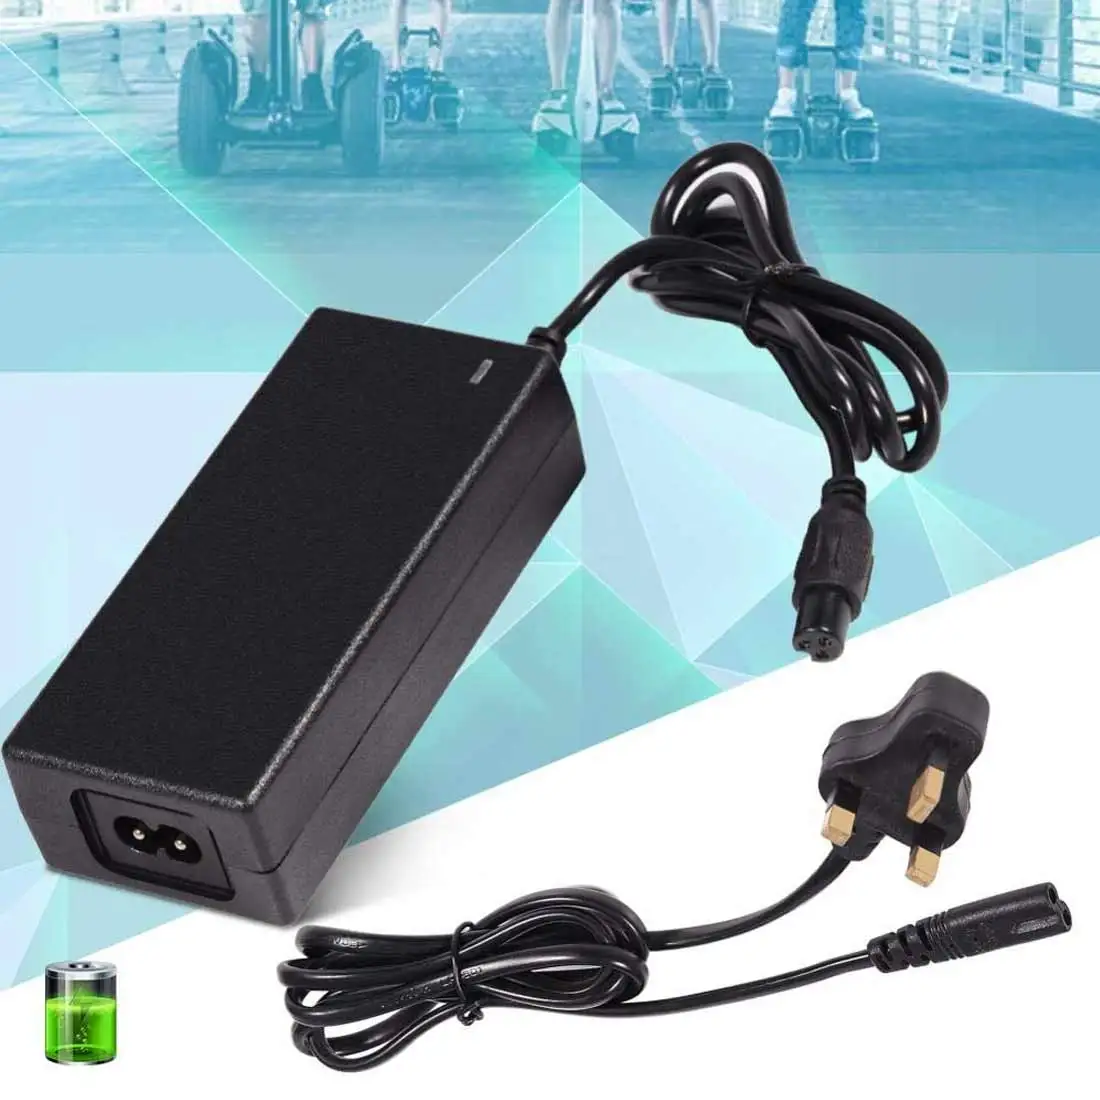 Top 42V 2A Power Adapter Electric Scooter Two Wheel Balance Car Adapter For 36V Lithium Battery Safe Charger Scooter Supplies 5